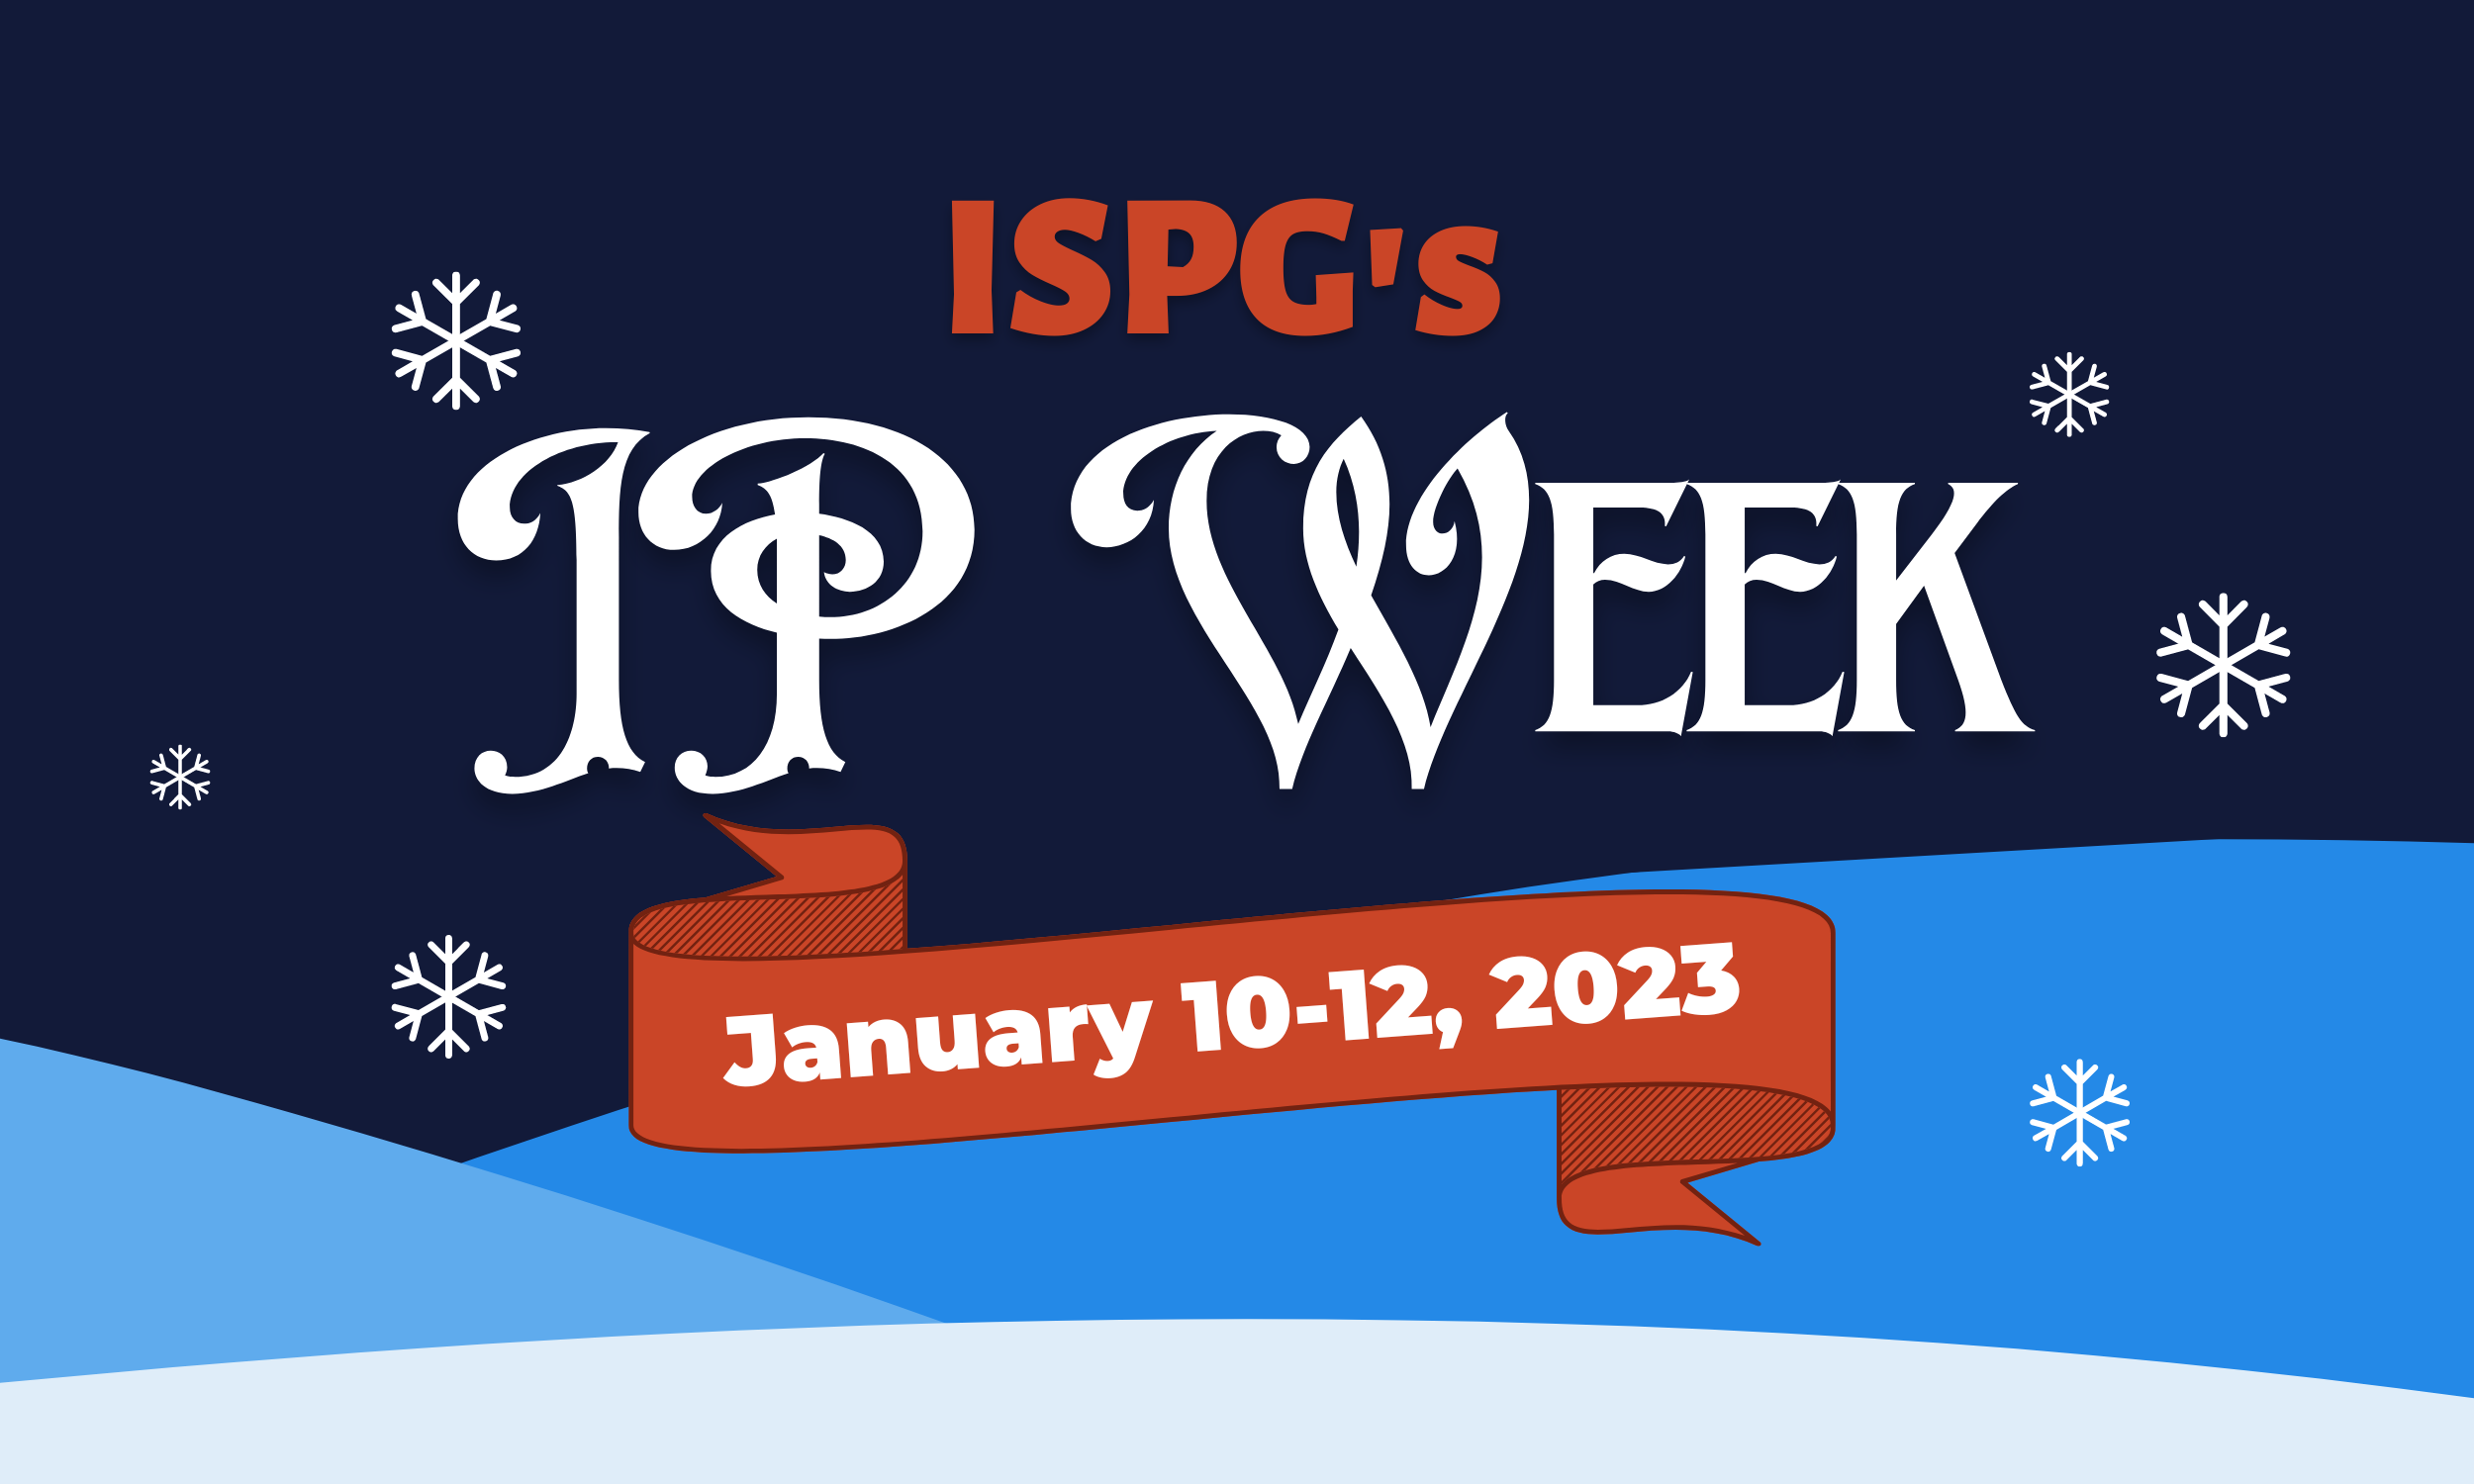 Graphic title card for ISPG's IP Week on January 10-12, 2023